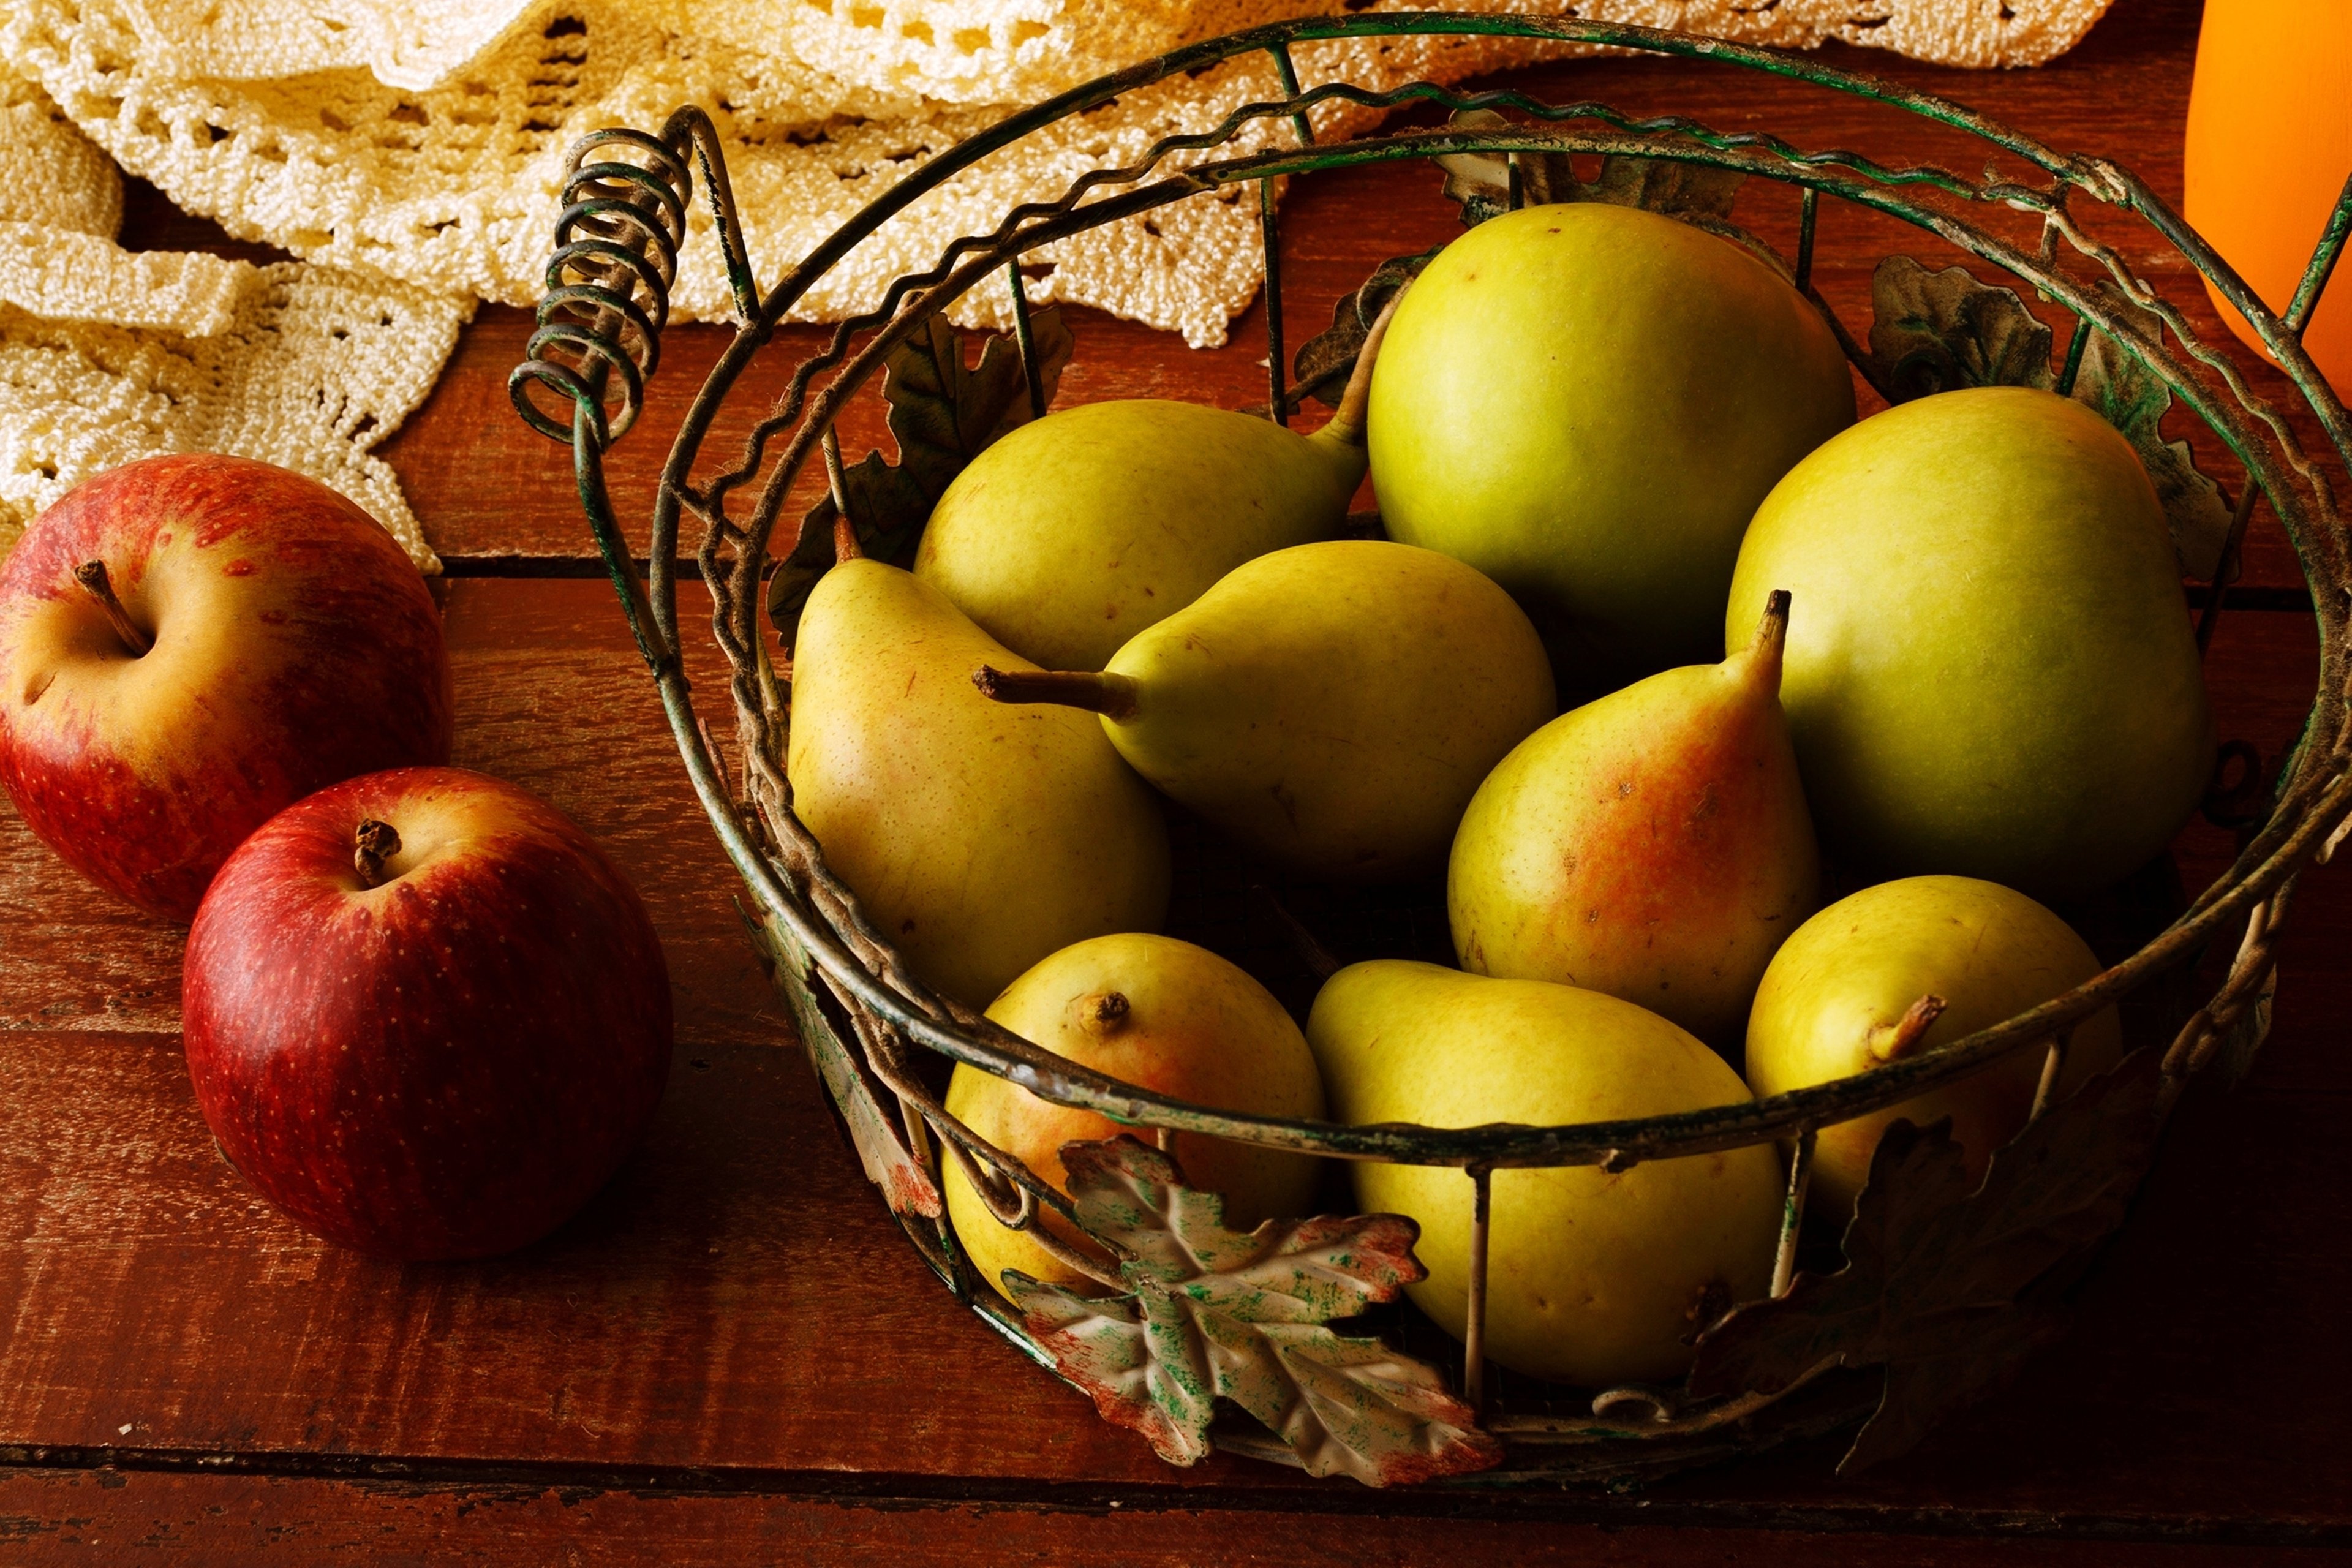 pear, Apple, Table, Poverty, Housewife, Happiness, Contentment, Fruits Wallpaper